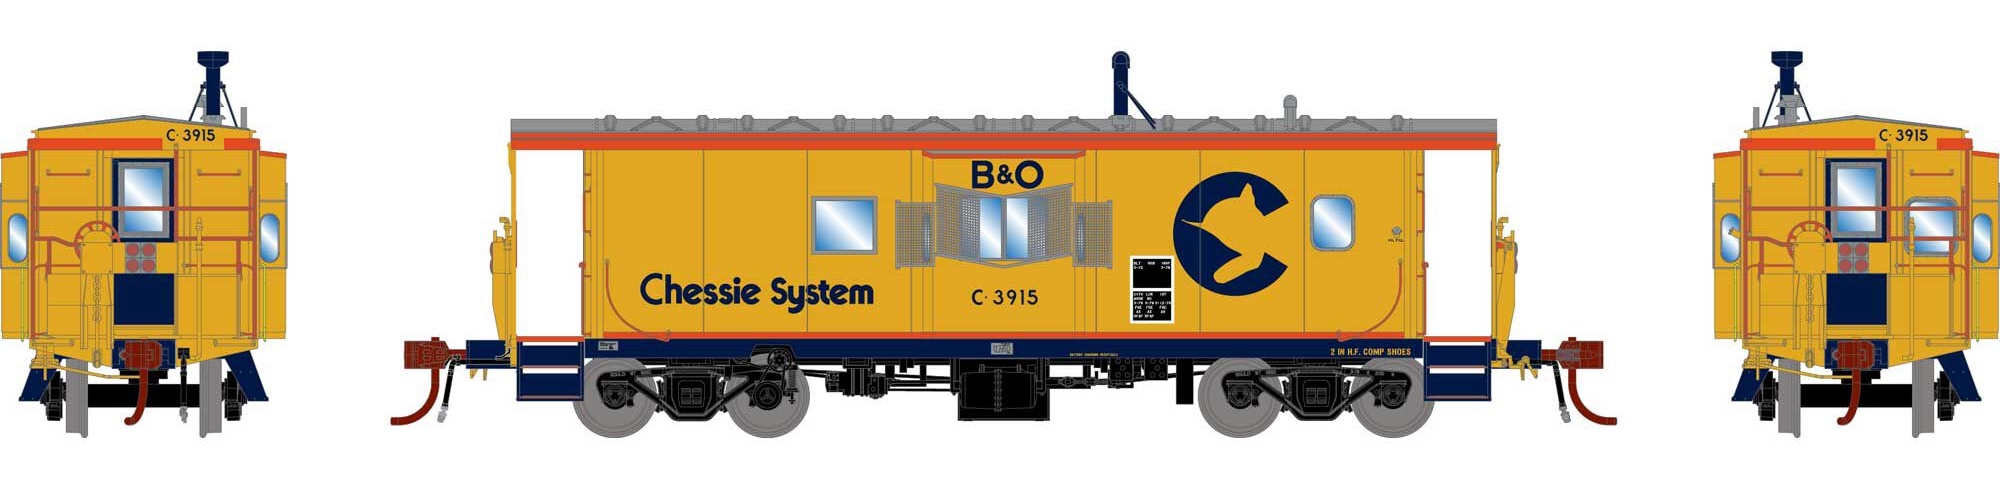 Athearn Genesis HO ATHG78349 DCC/Tsunami SoundCar Equipped C-26A ICC Caboose with Lights & Sound Chessie/B&O #C-3915